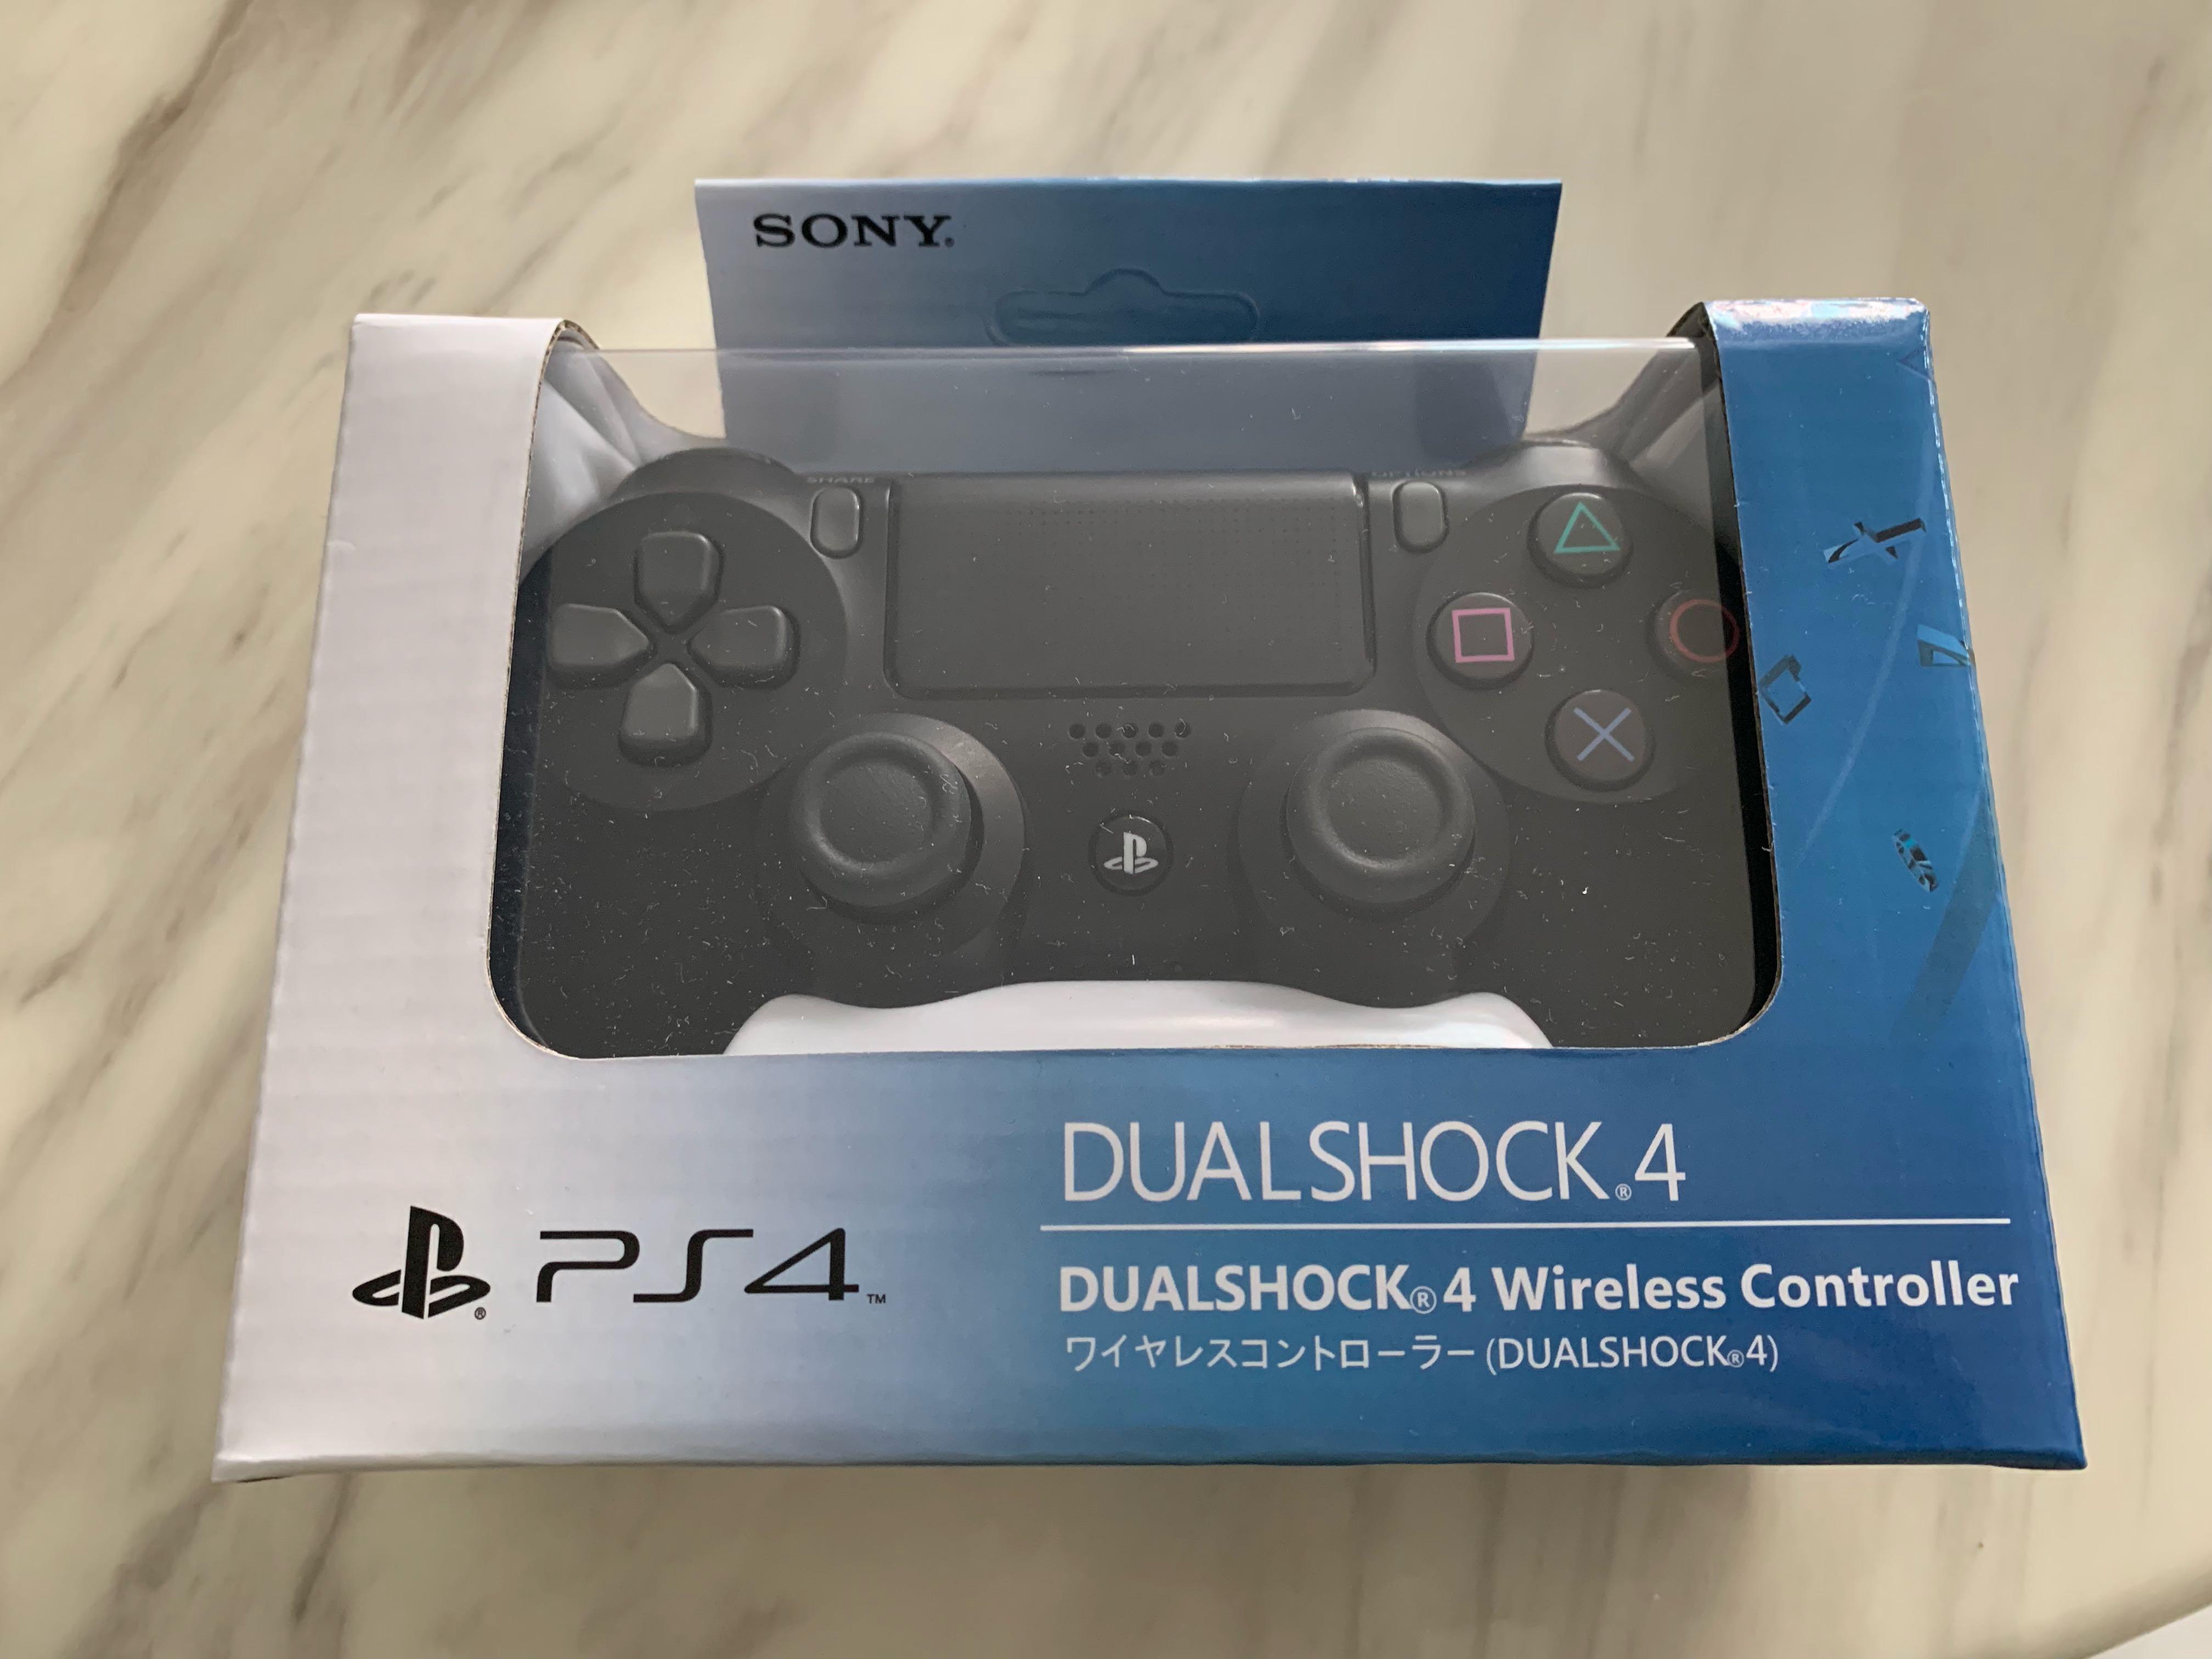 low price ps4 controller